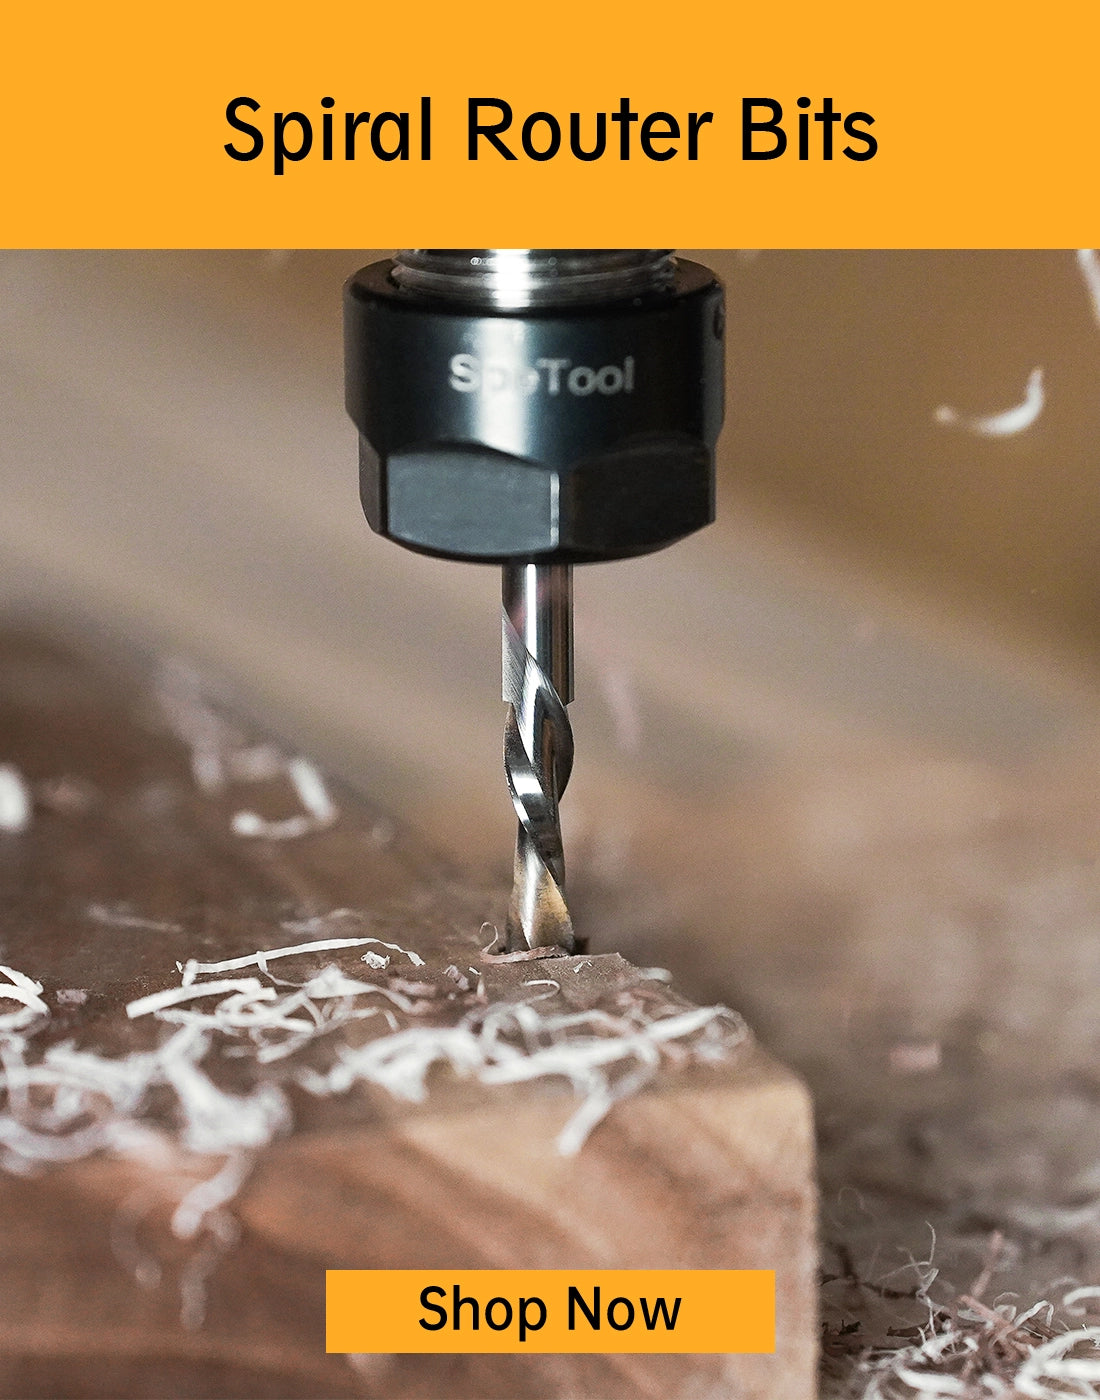 SpeTool Spiral Router Bits